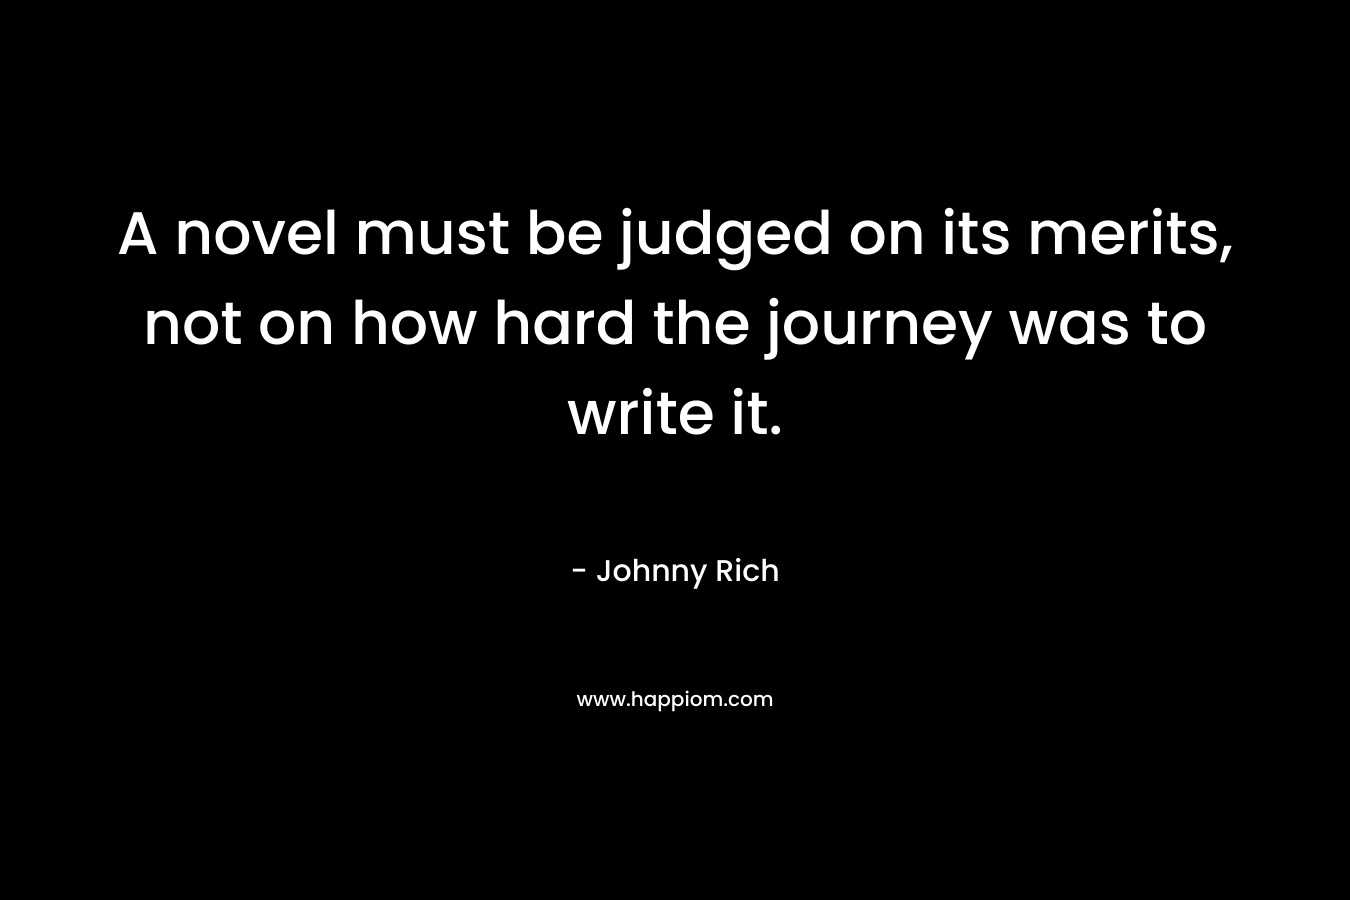 A novel must be judged on its merits, not on how hard the journey was to write it.